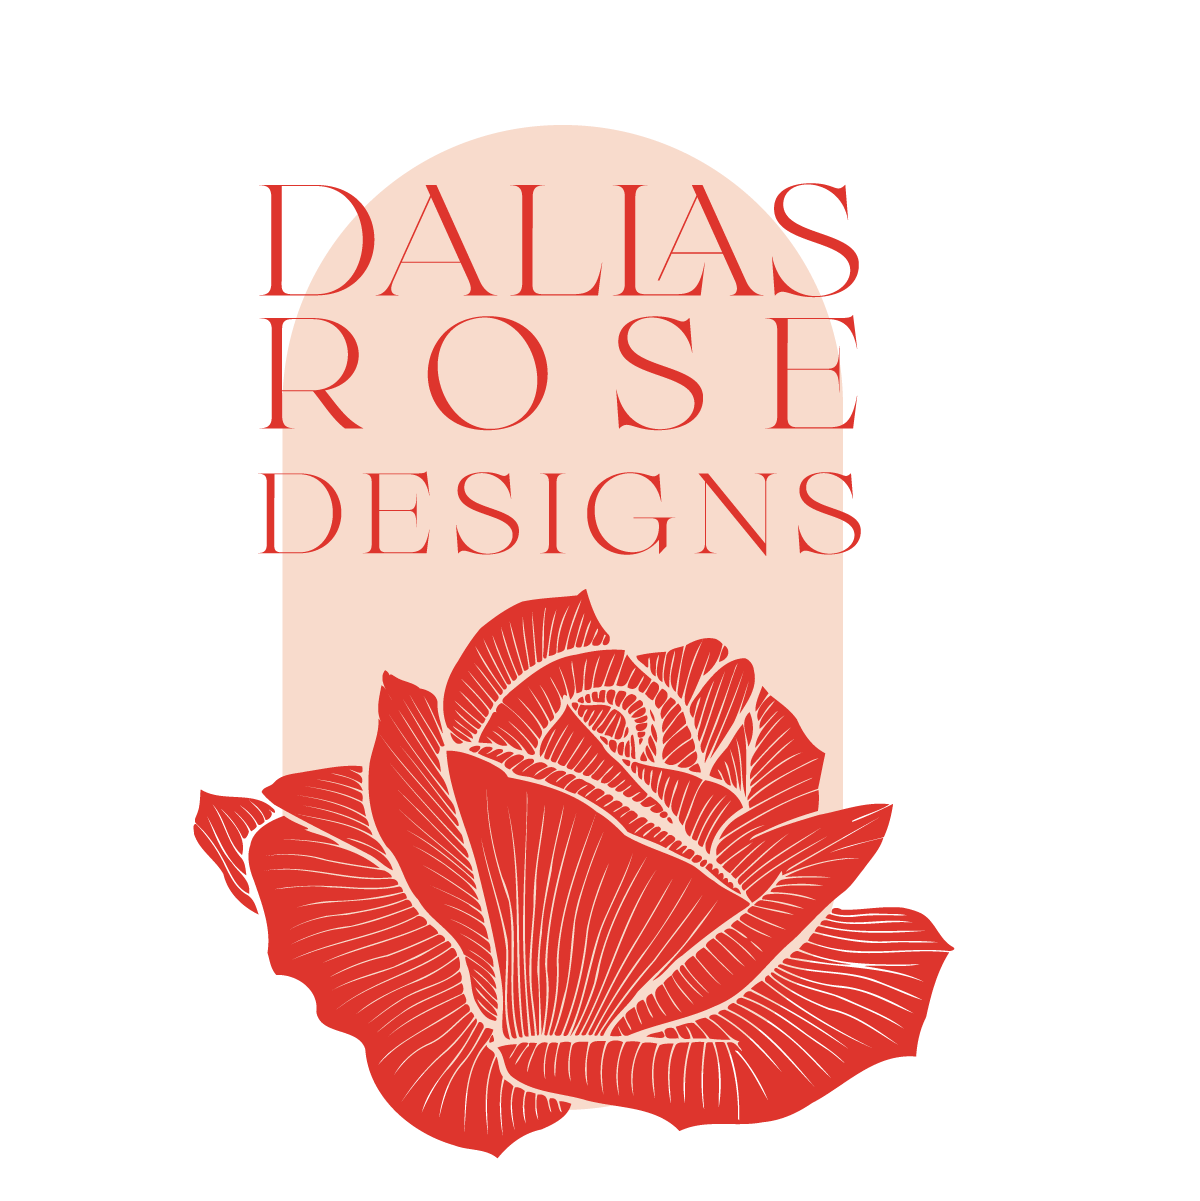 A logo for dallas rose designs with a red rose